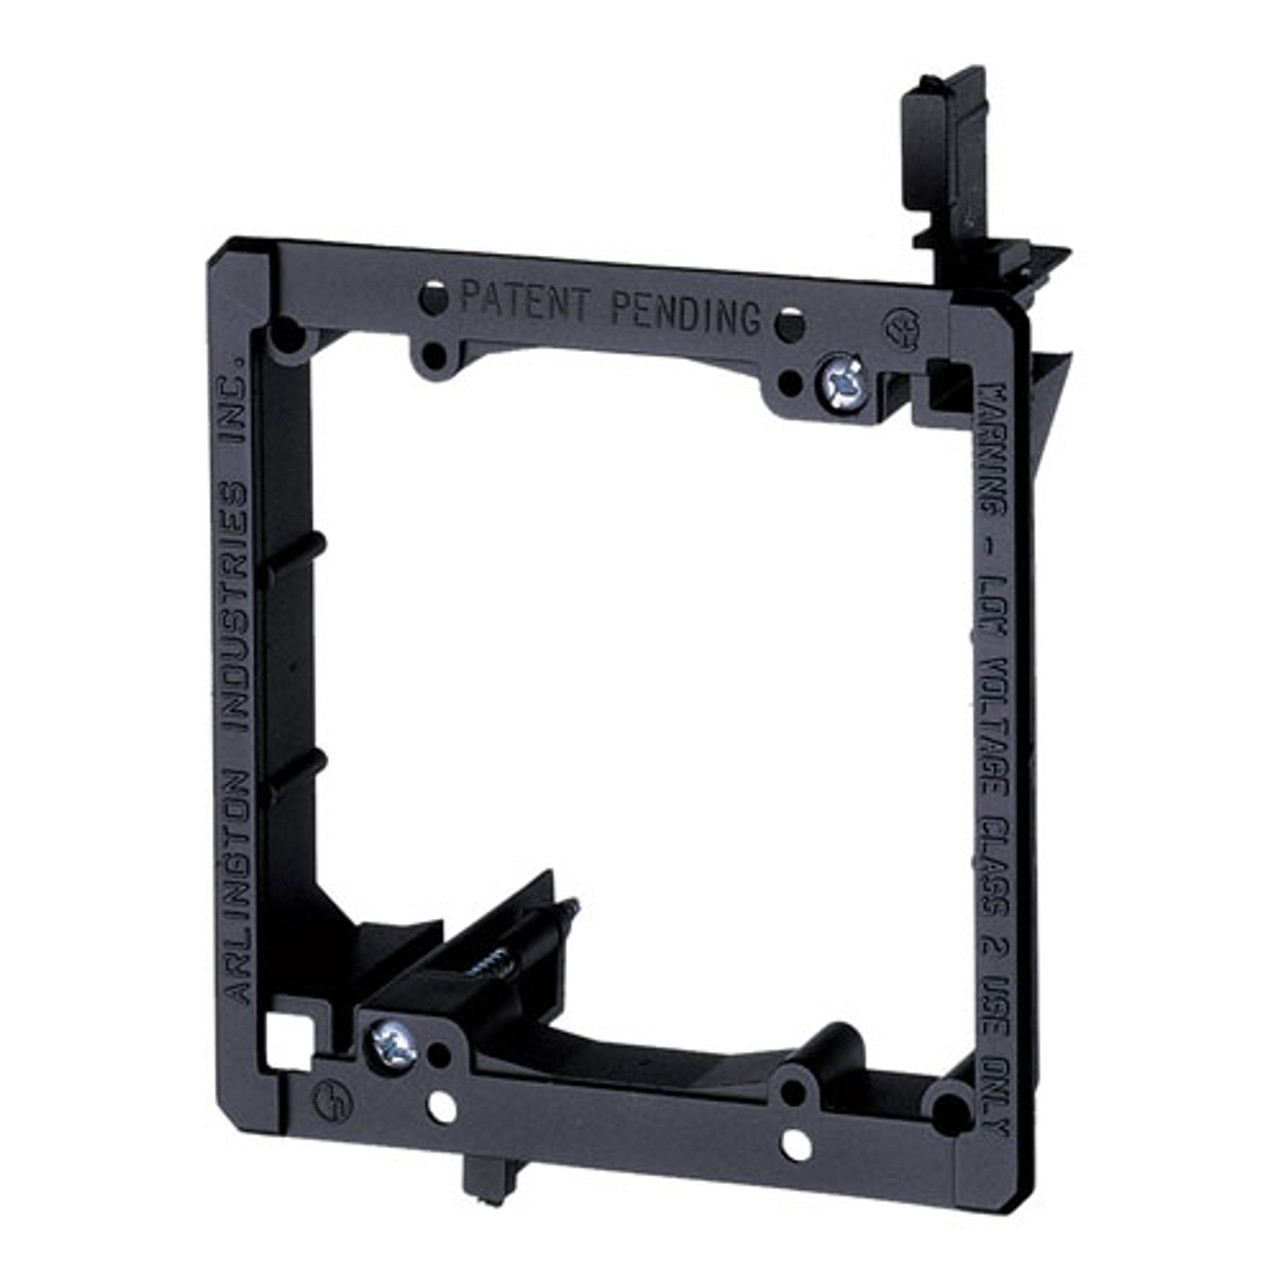 1-Gang Low Voltage Face Mount Bracket for New Construction